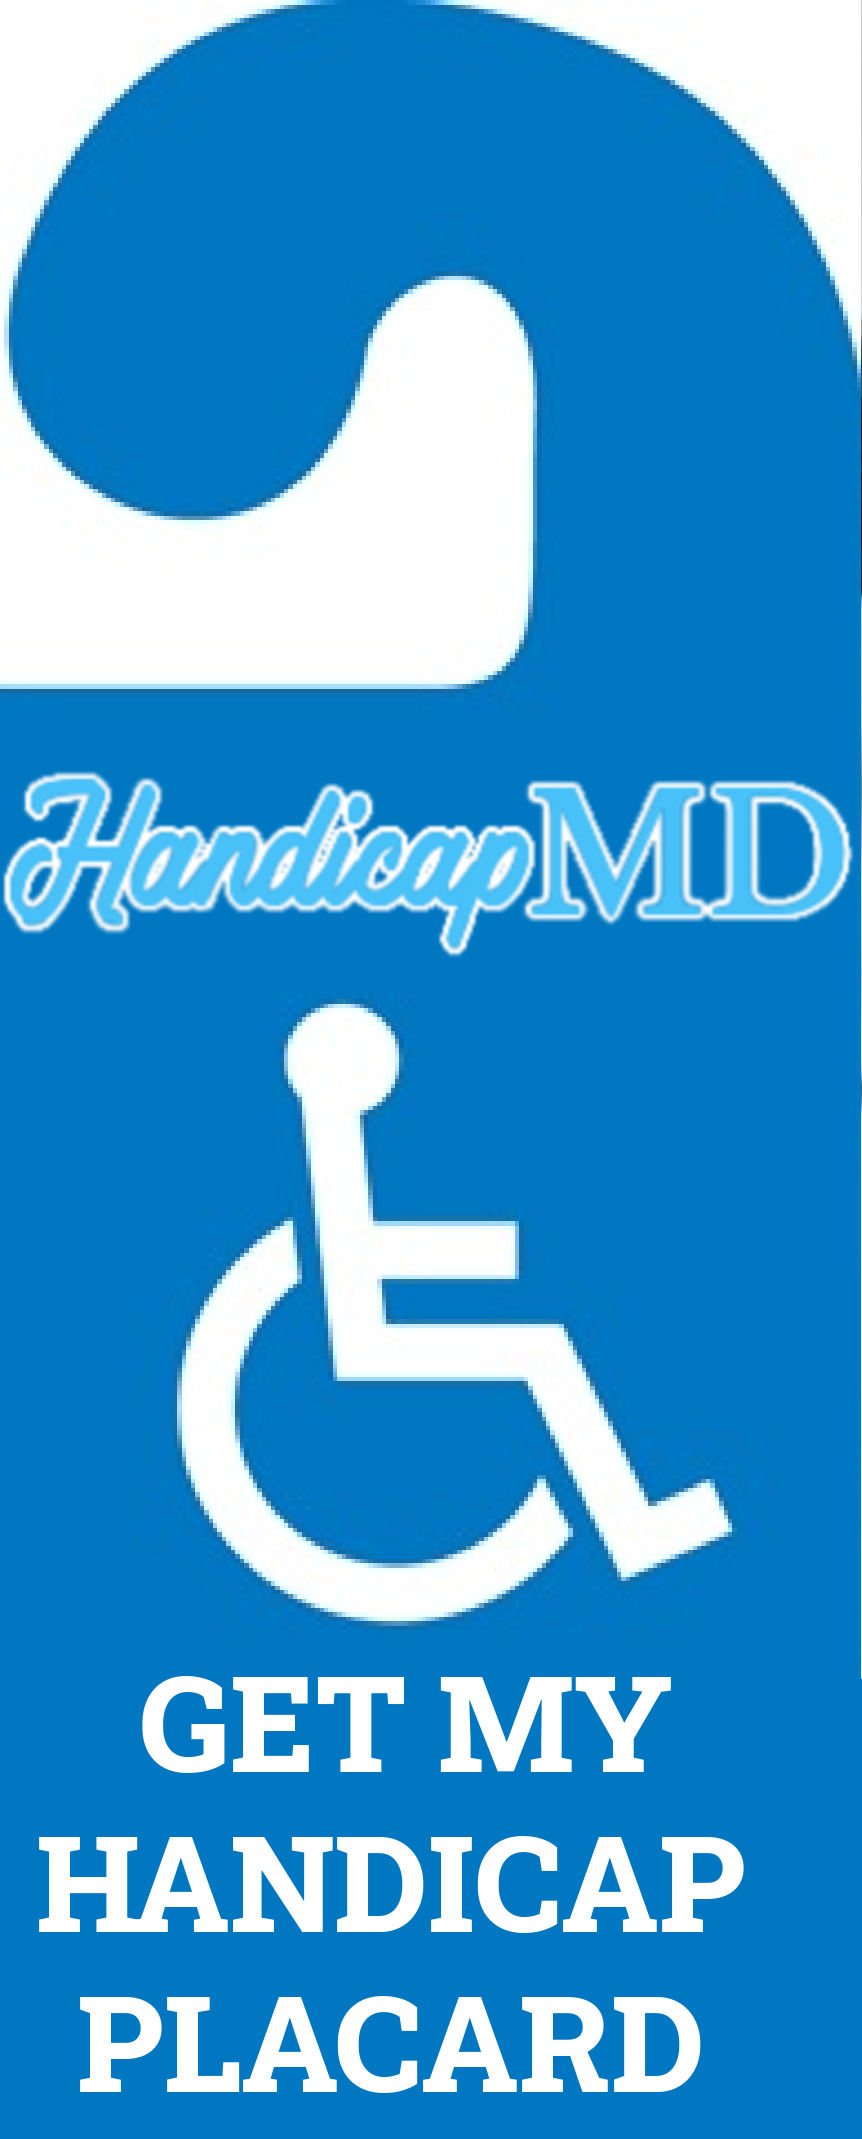 Tips for Making the Most of Your Handicap Placard in North Carolina